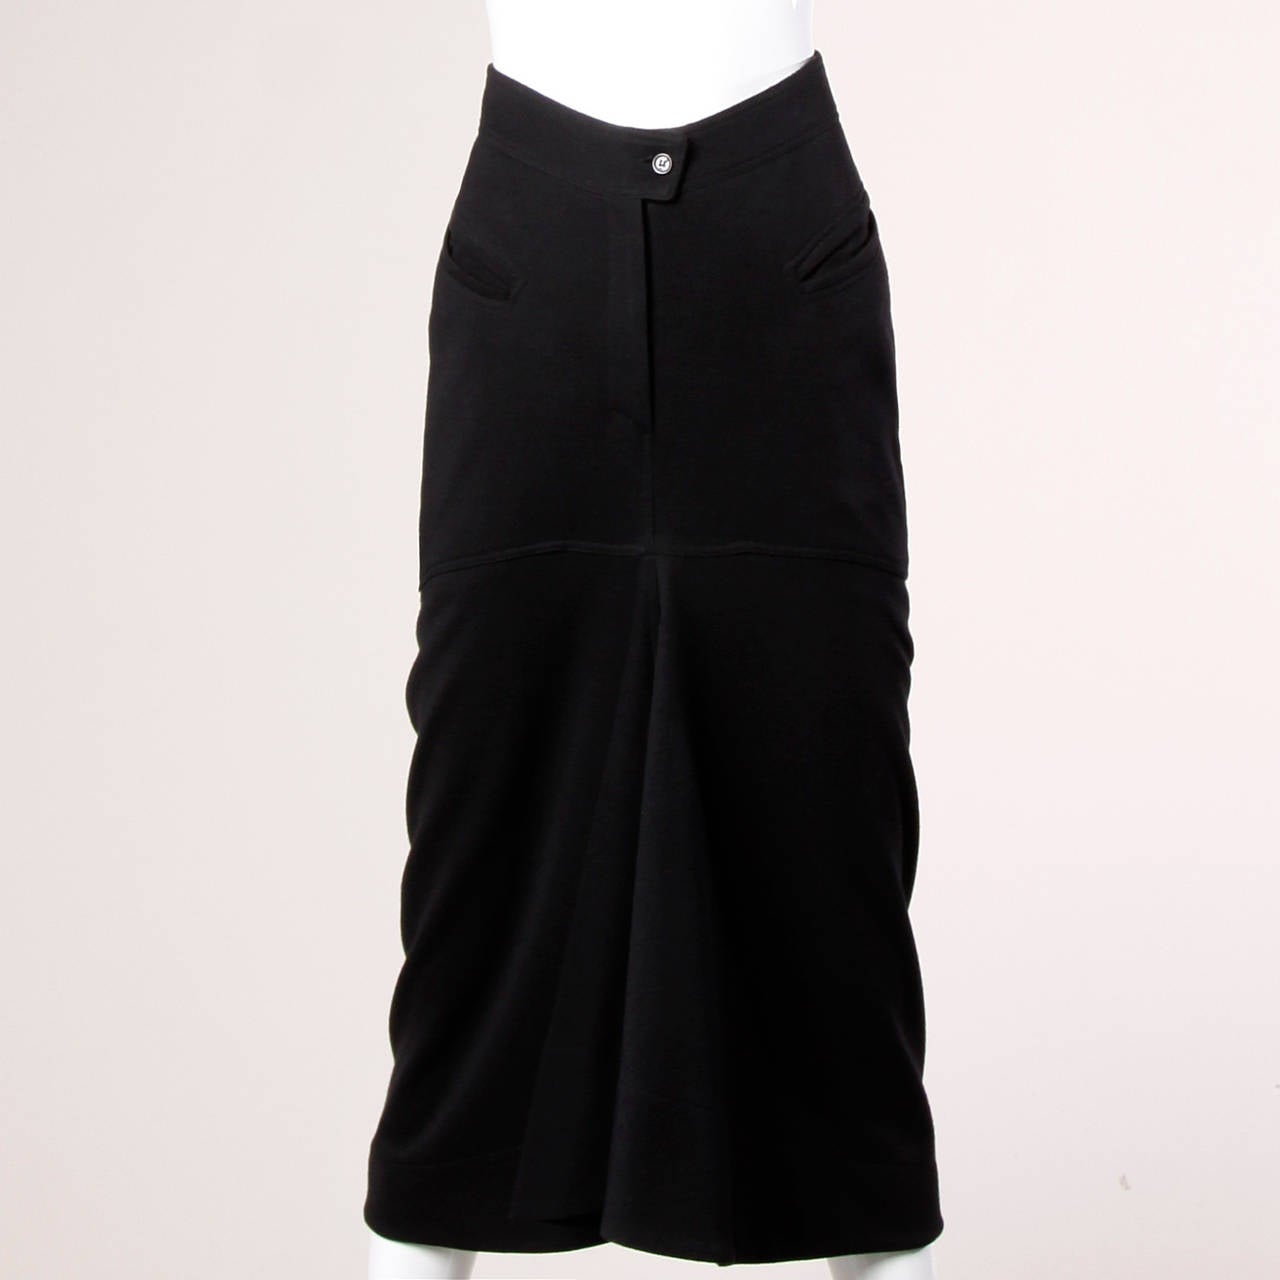 Unique vintage black wool skirt by Claude Montana with a flounce hem and body hugging fit. Zipper detailing adds a sporty look to the piece.

Details:

Partially Lined
Front Button and Zip Closure
Marked Size: US 8/ I 42/ F 40/ GB 34/ D